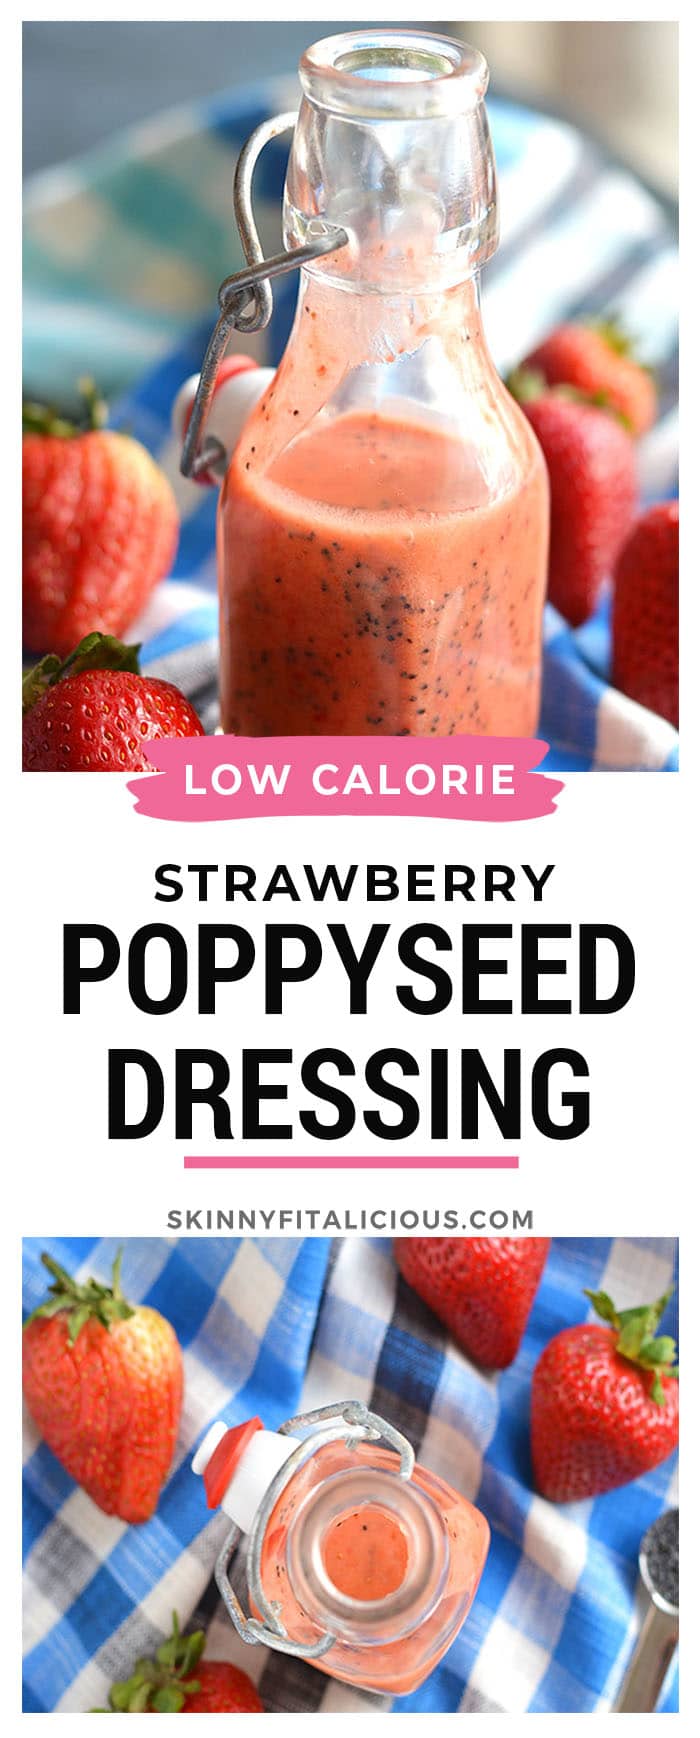 Low Calorie Strawberry Poppyseed Salad packed with delicious, simple ingredients & a light strawberry poppyseed vinaigrette. Easy to make fresh at home.